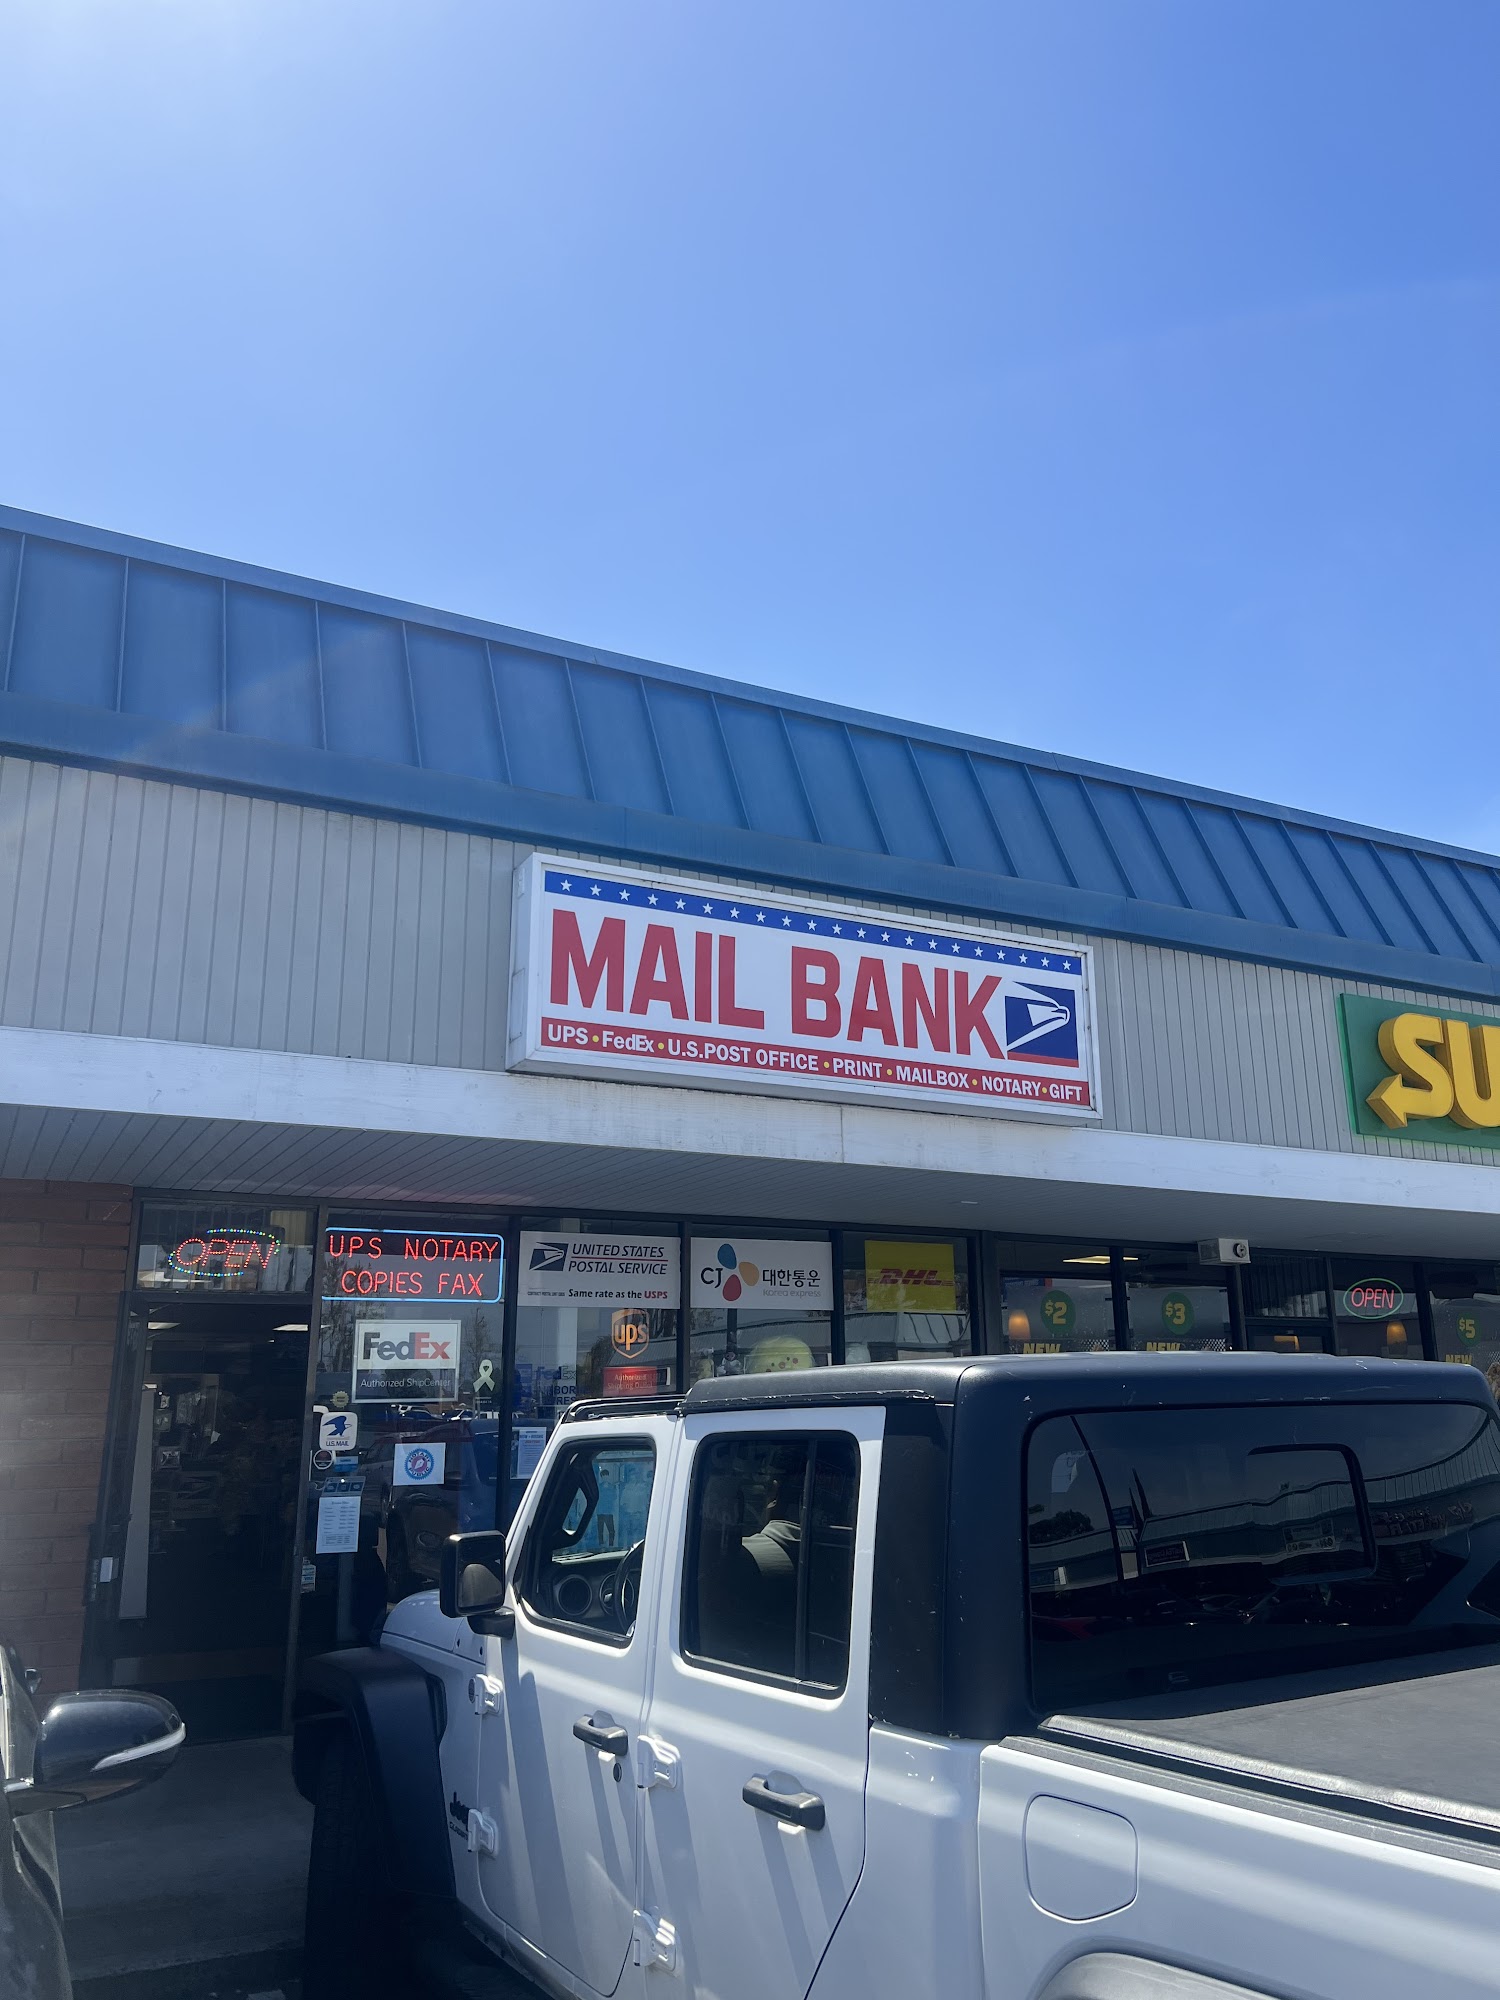 The Mail Bank